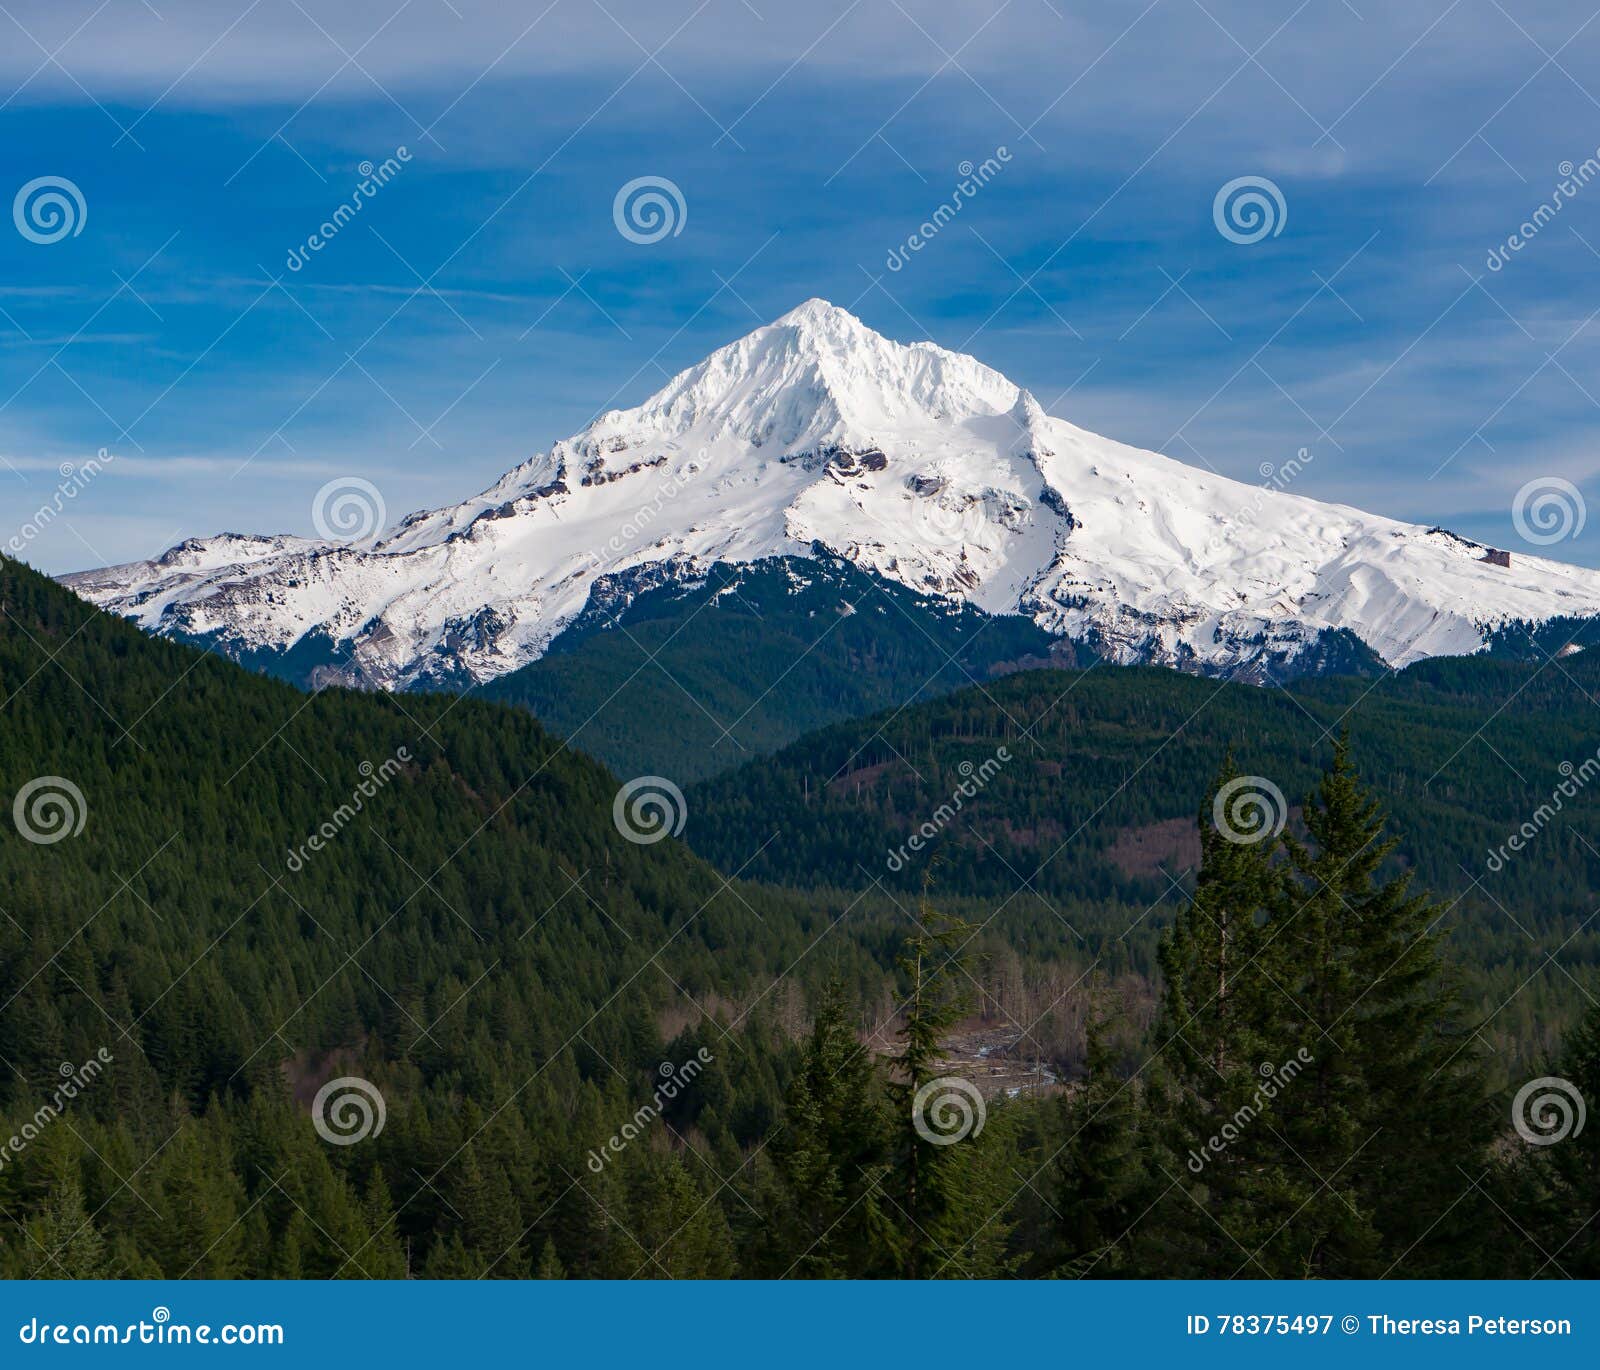 mt hood from lolo pass in oregon 2